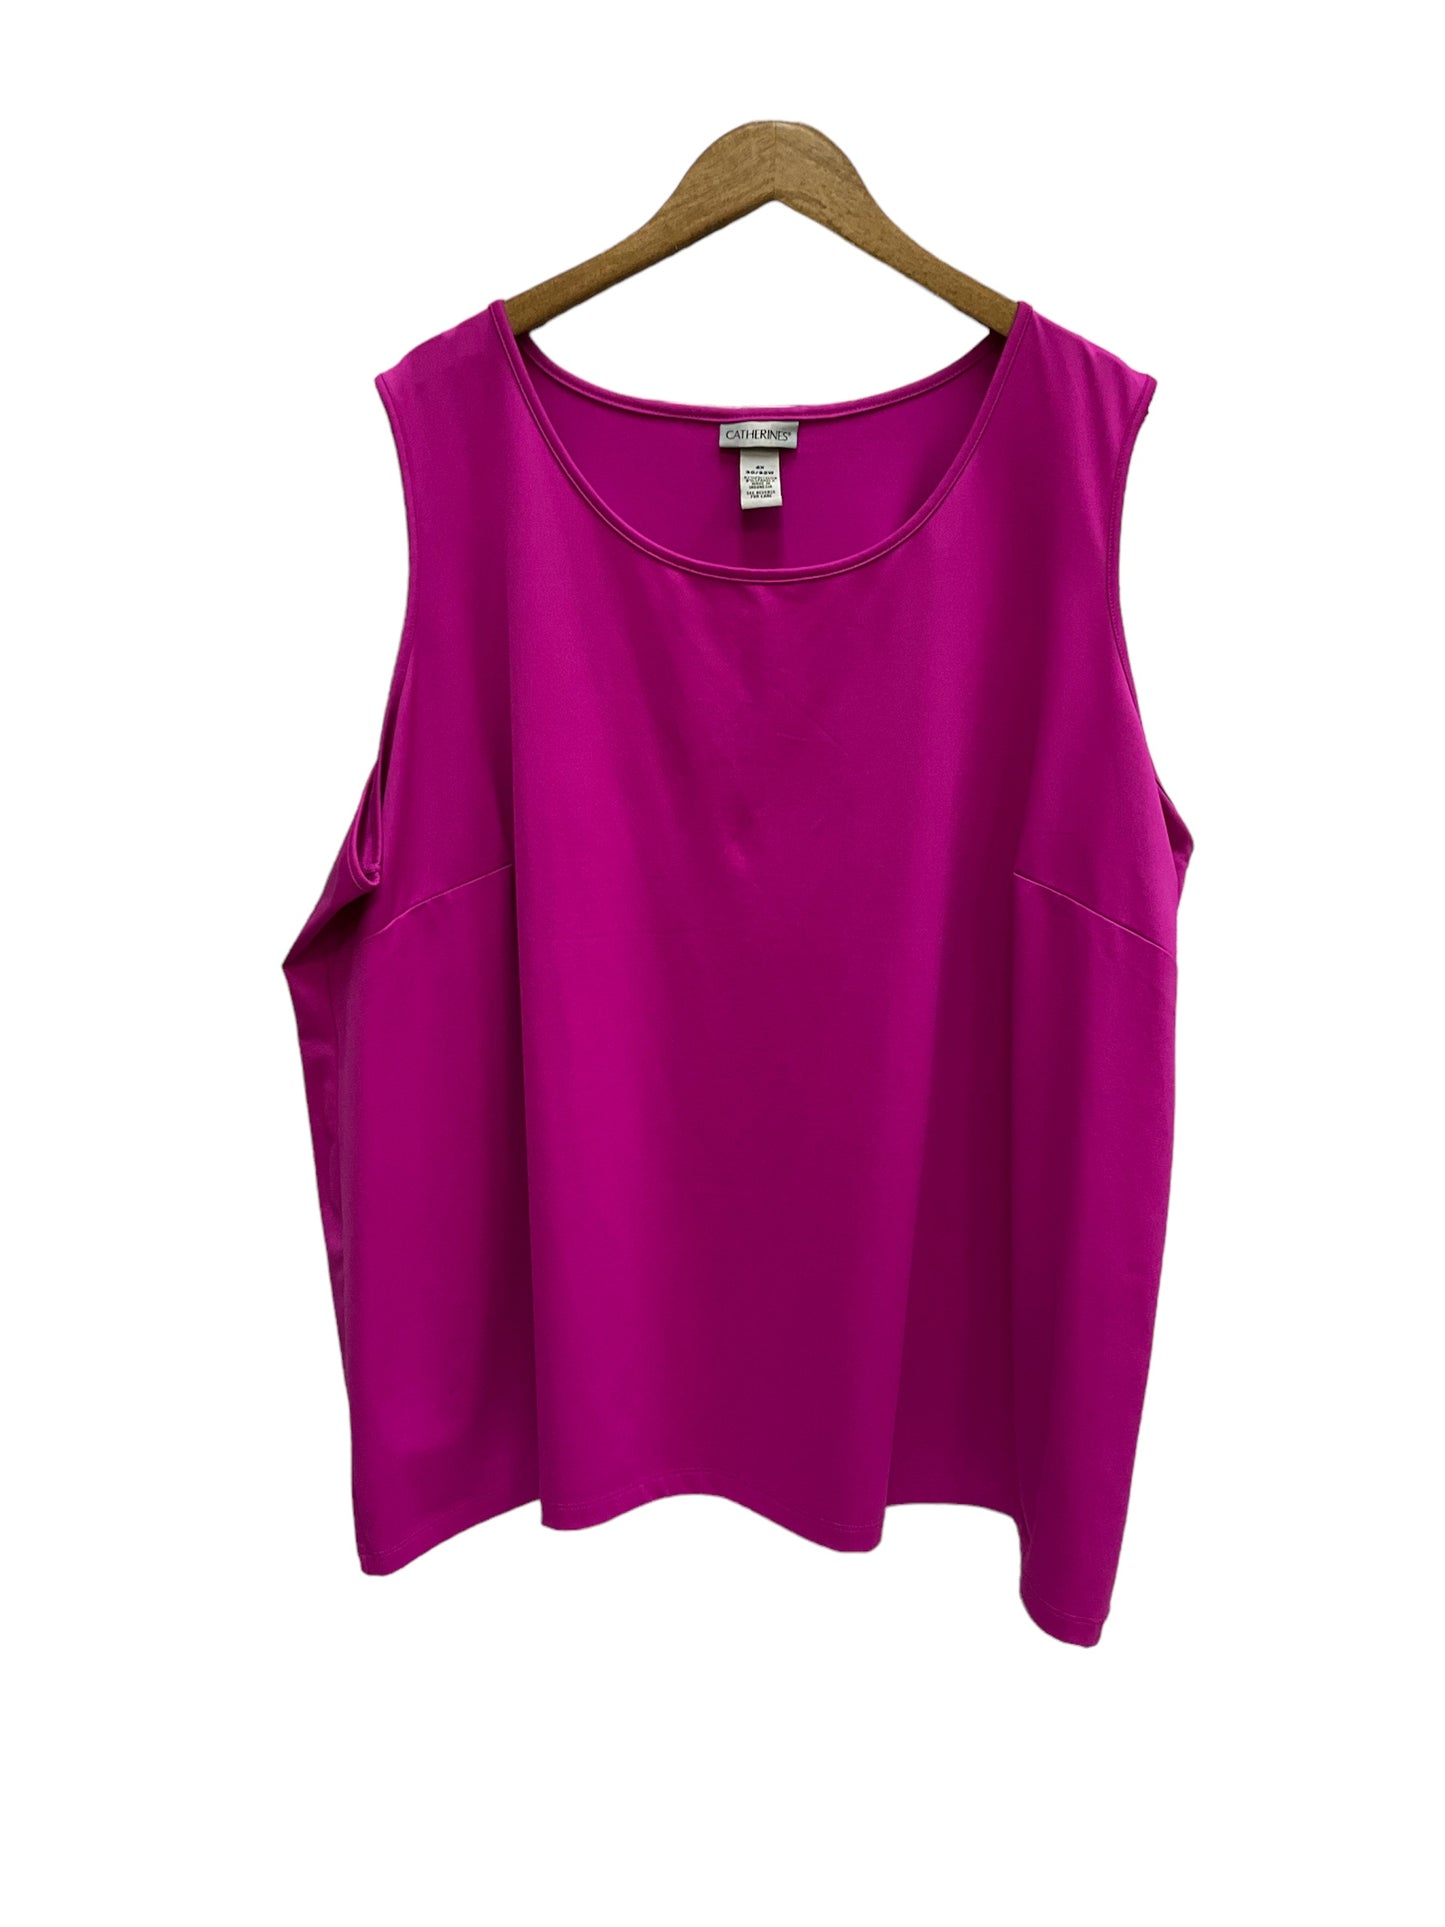 Top Sleeveless By Catherines  Size: 4x